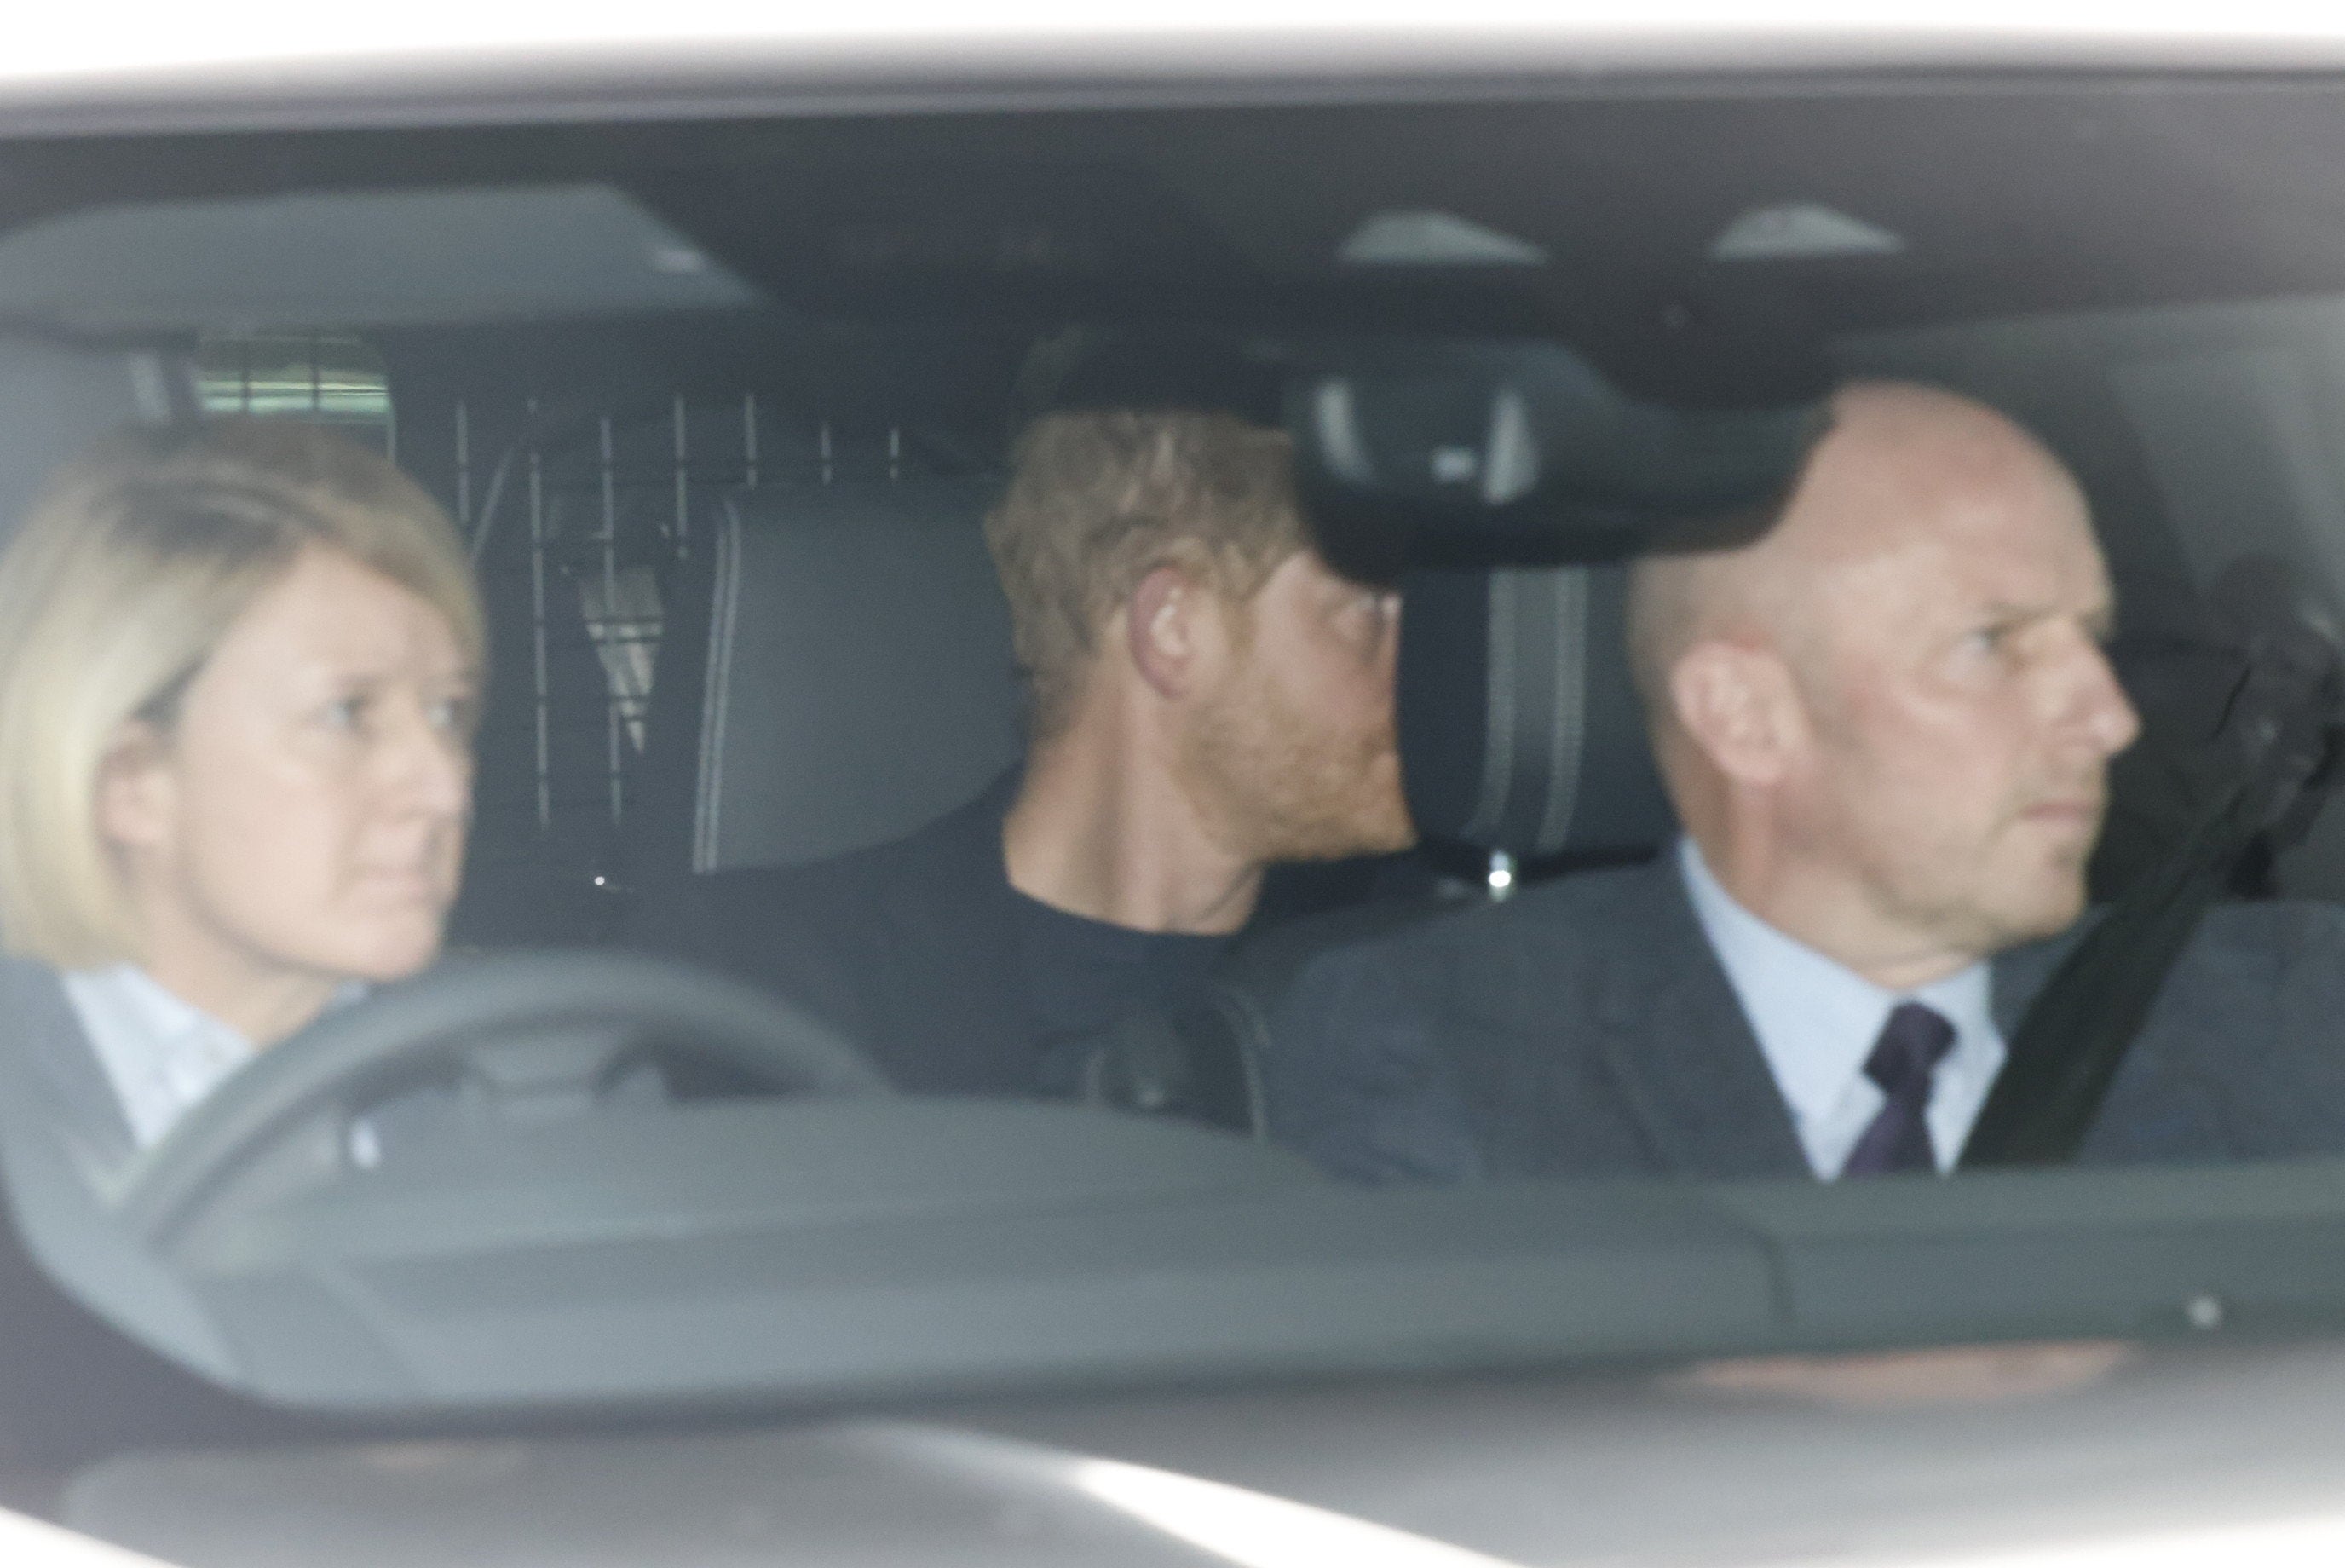 Prince Harry has been spotted as he arrived in the UK to be reunited with his father following the King’s shocking cancer diagnosis